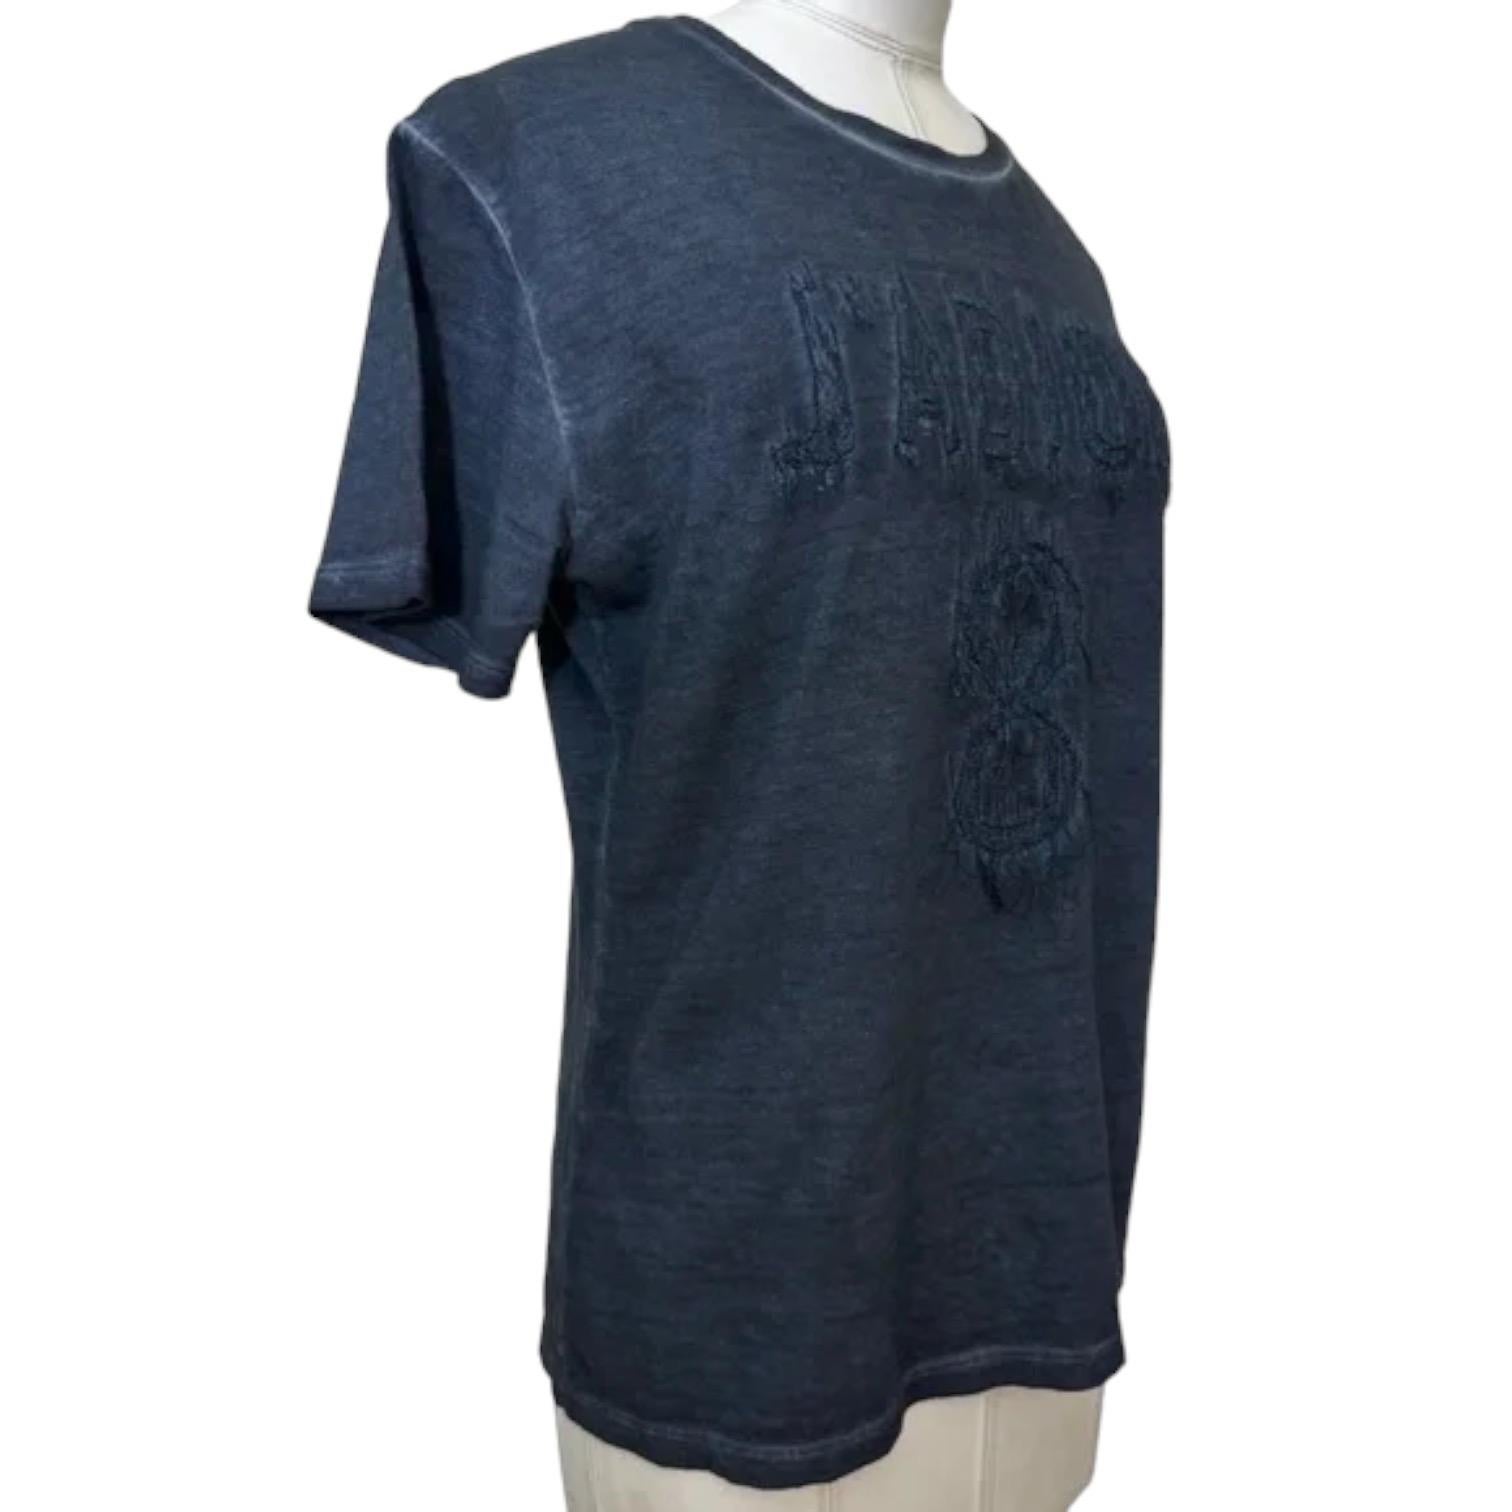 GUARANTEED AUTHENTIC CHRISTIAN DIOR NAVY J'ADIOR 8 T-SHIRT

Design:
- J'Adior 8 logo t-shirt in a navy blue tie-dye.
- Fringe design to the logo.
- Crew neck.
- Short sleeve.
- Slip on.

Size: S

Material: 85% Cotton, 15% Linen

Measurements